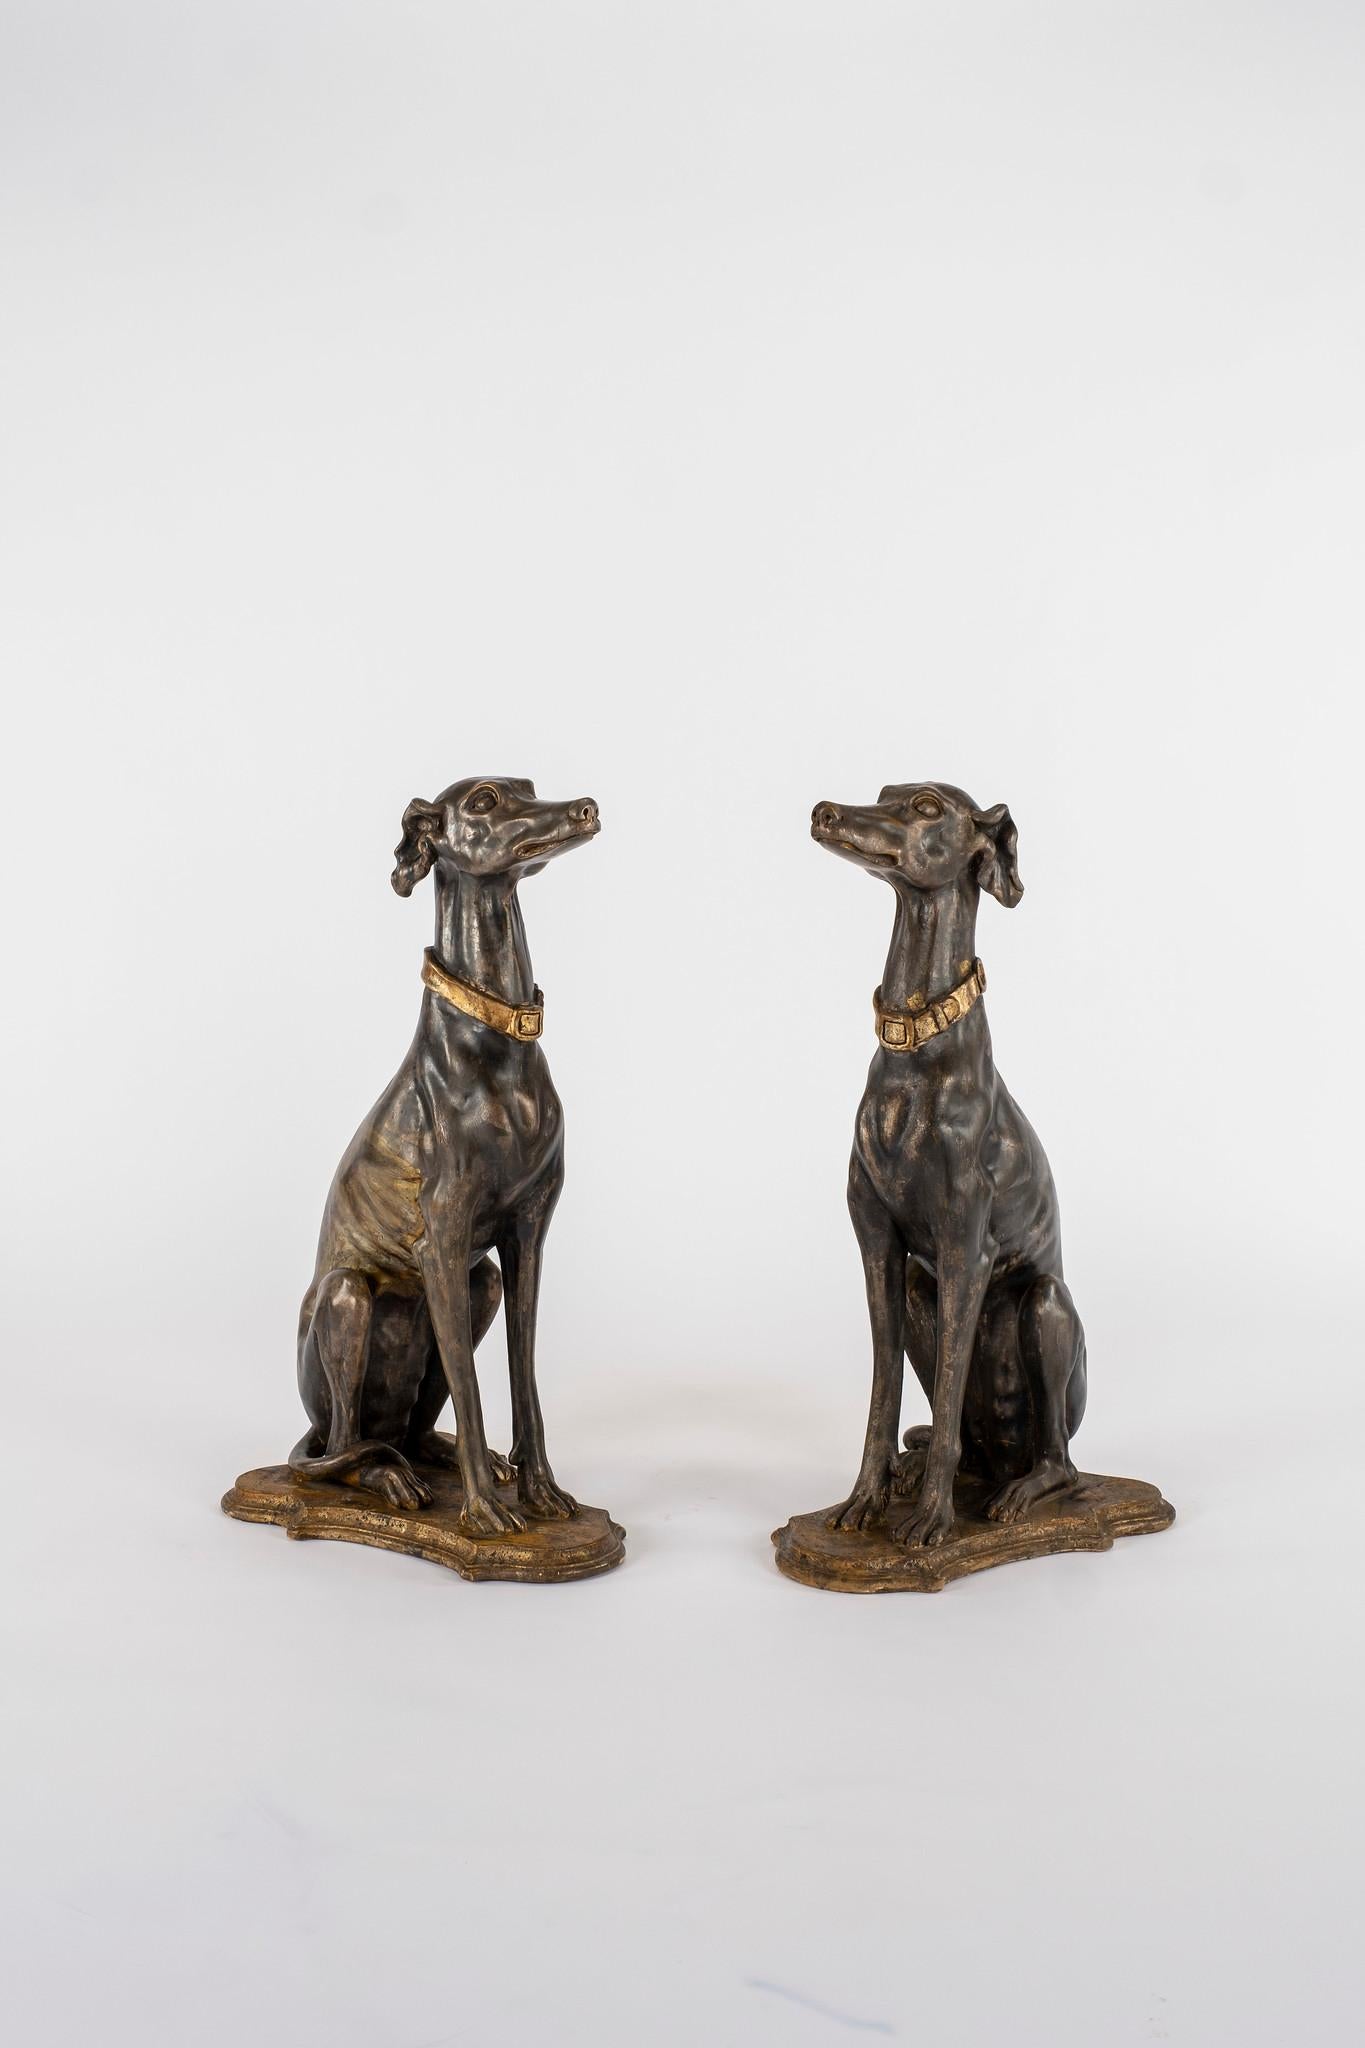 This pair of tall Italian greyhound sculptures are from the late 19th century. Silver gilding with patination, skillful attention has been brought to the details to include their head, ears, body and paws, around which their tail is wrapped, as well